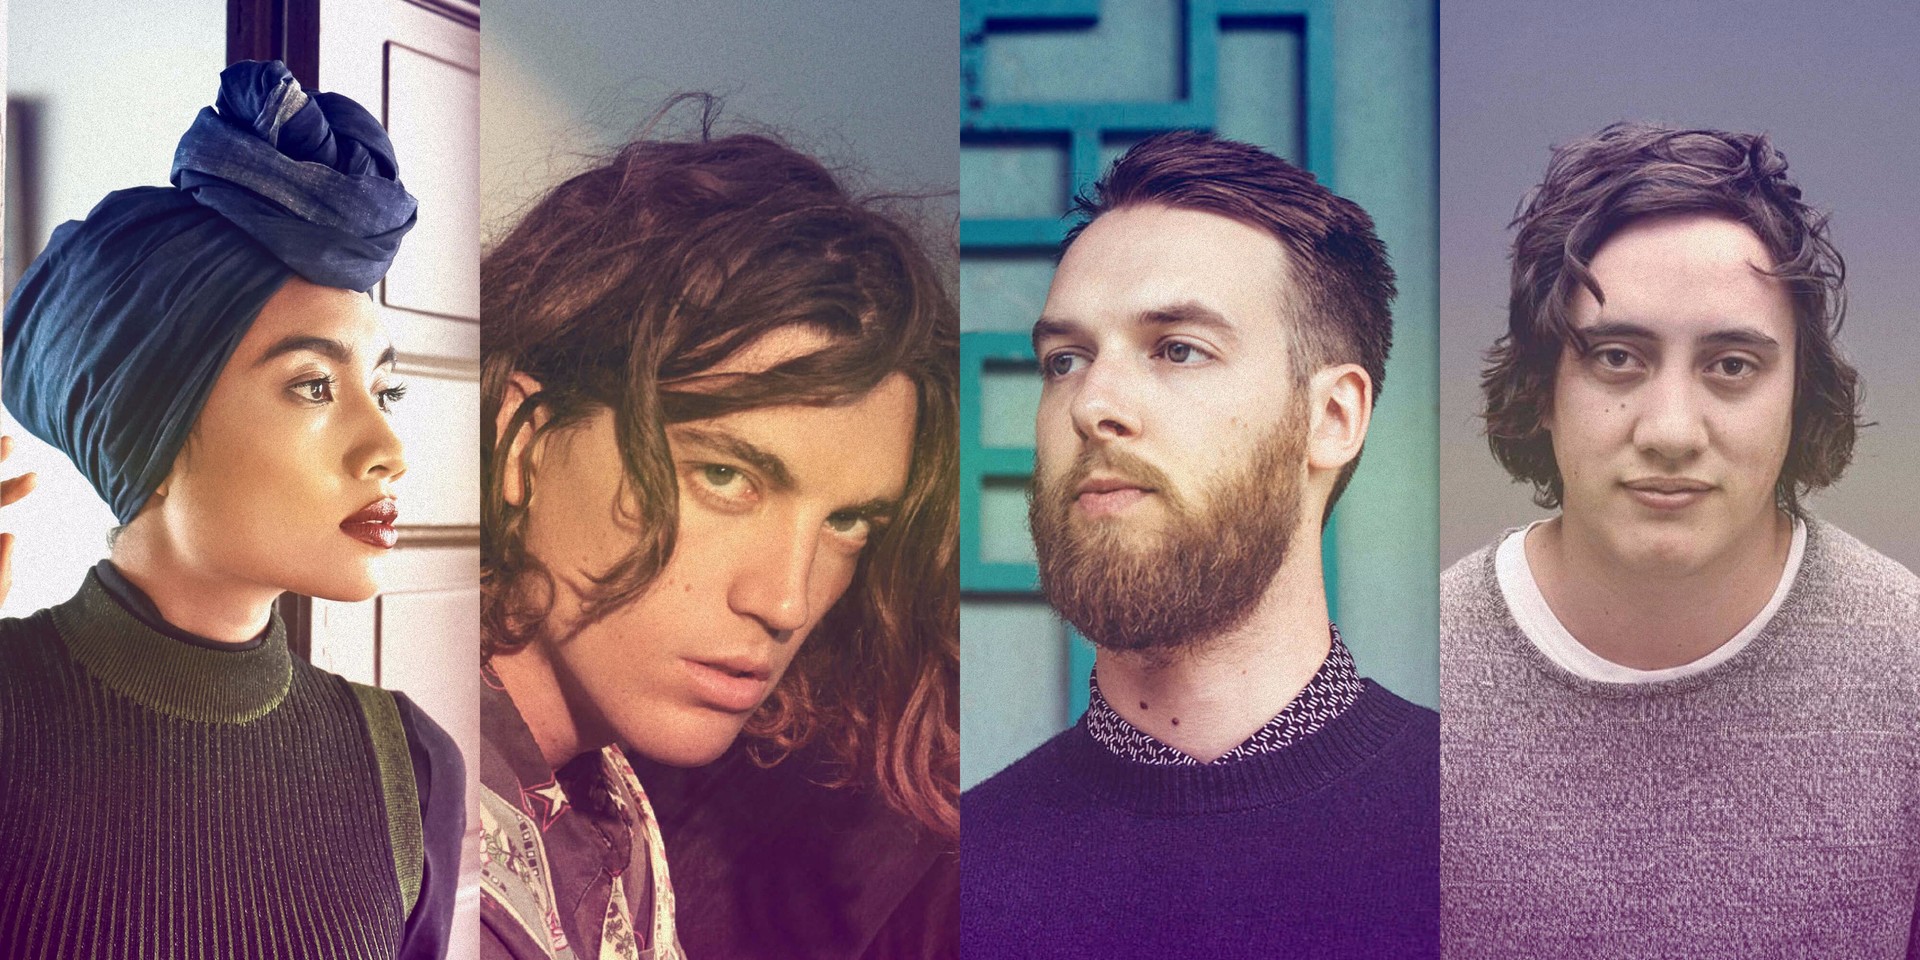 HONNE, Woodlock, LANY and YUNA talk about their local music scenes, festivals, and social media